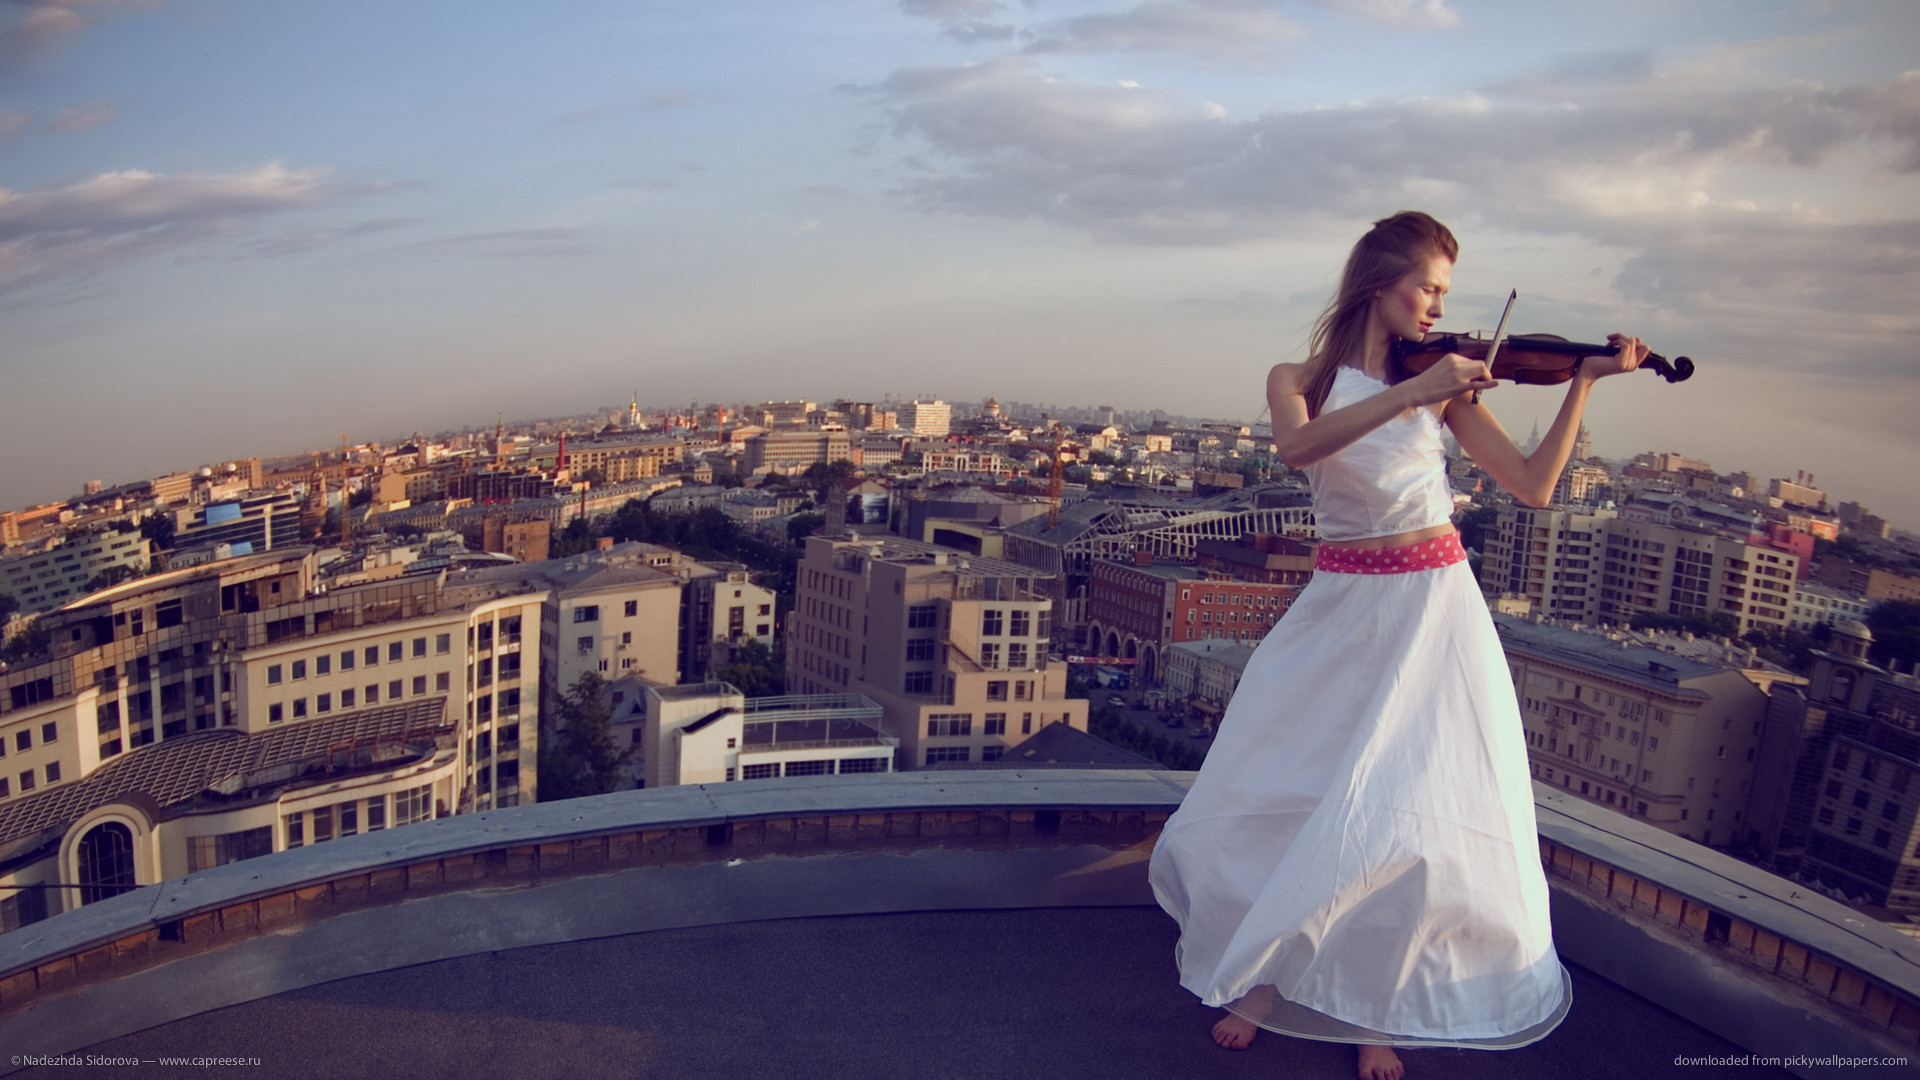 1920x1080  Playing violin on a roof wallpaper